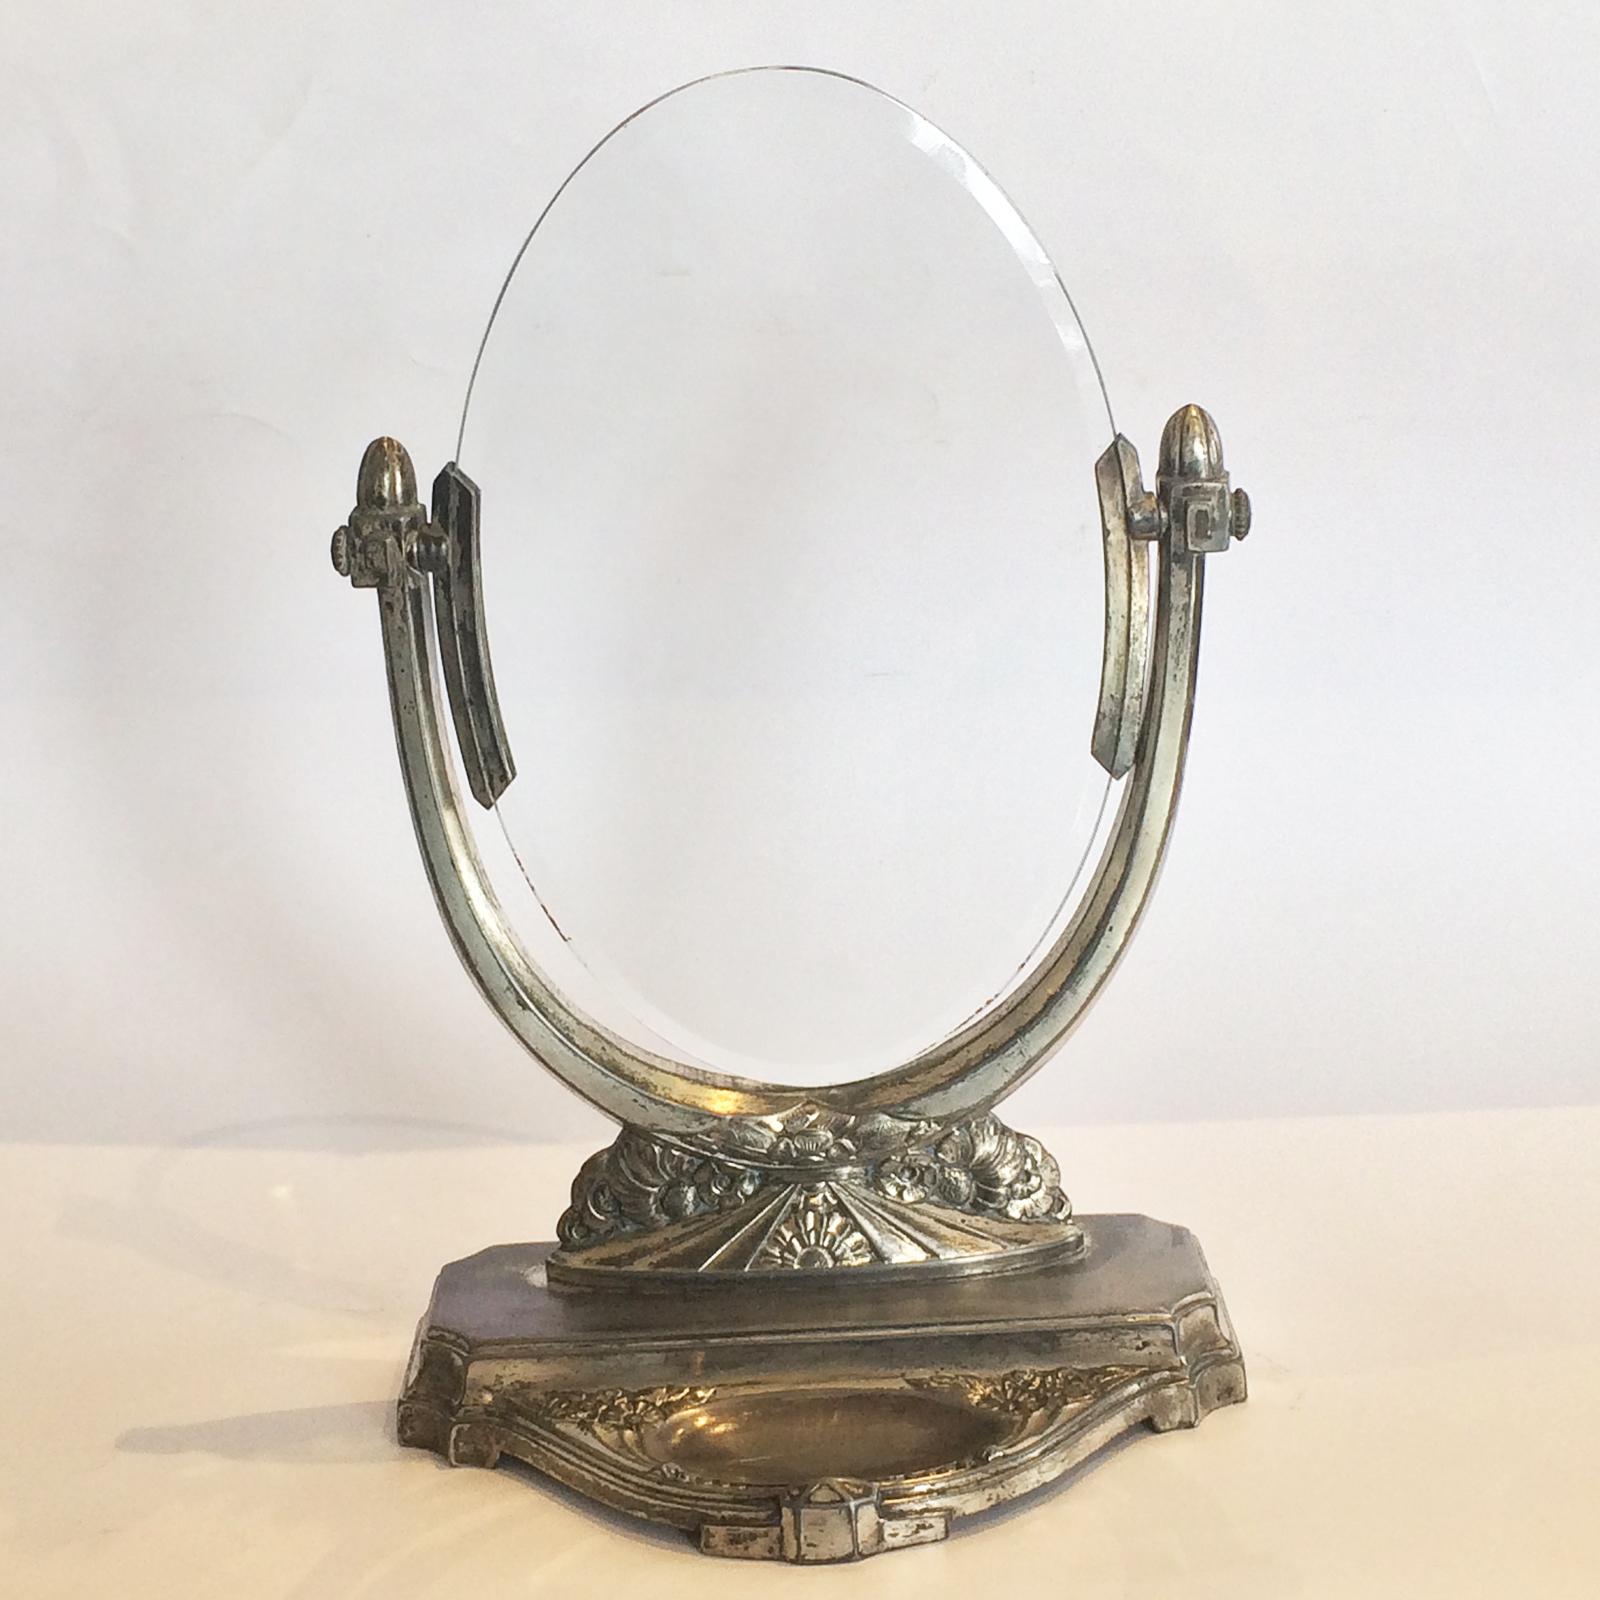 Art Deco bevelled glass photo frame by Dilecta. Fantastic piece with fine detailing and silver plated. The glass has a fine bevel to the elliptical perimeter, and the glass can swivel between the side supports, and is “cradled” in curved brackets to